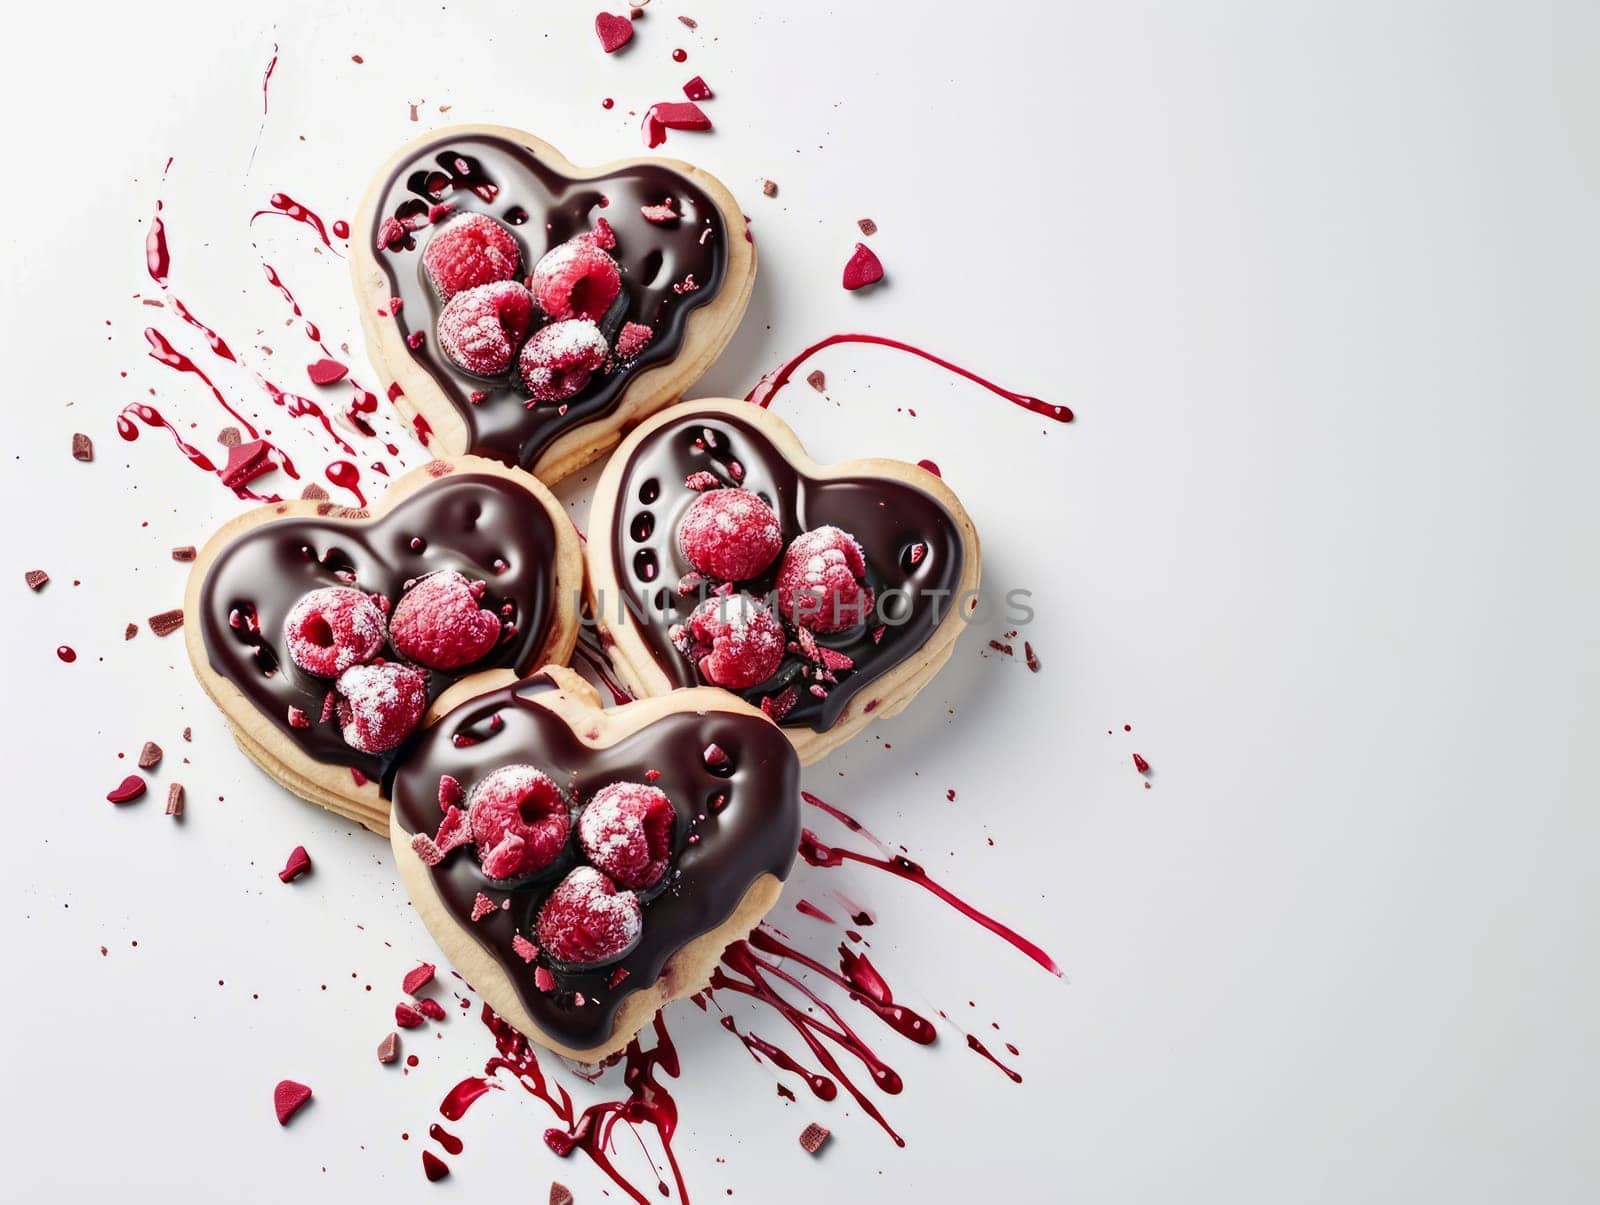 Tasty Yummy Homemade Sweet Cookies. Chocolate and Raspberry Heart Shape Pastry Dessert. Food Photo Background. Valentine's Day Composition. by iliris